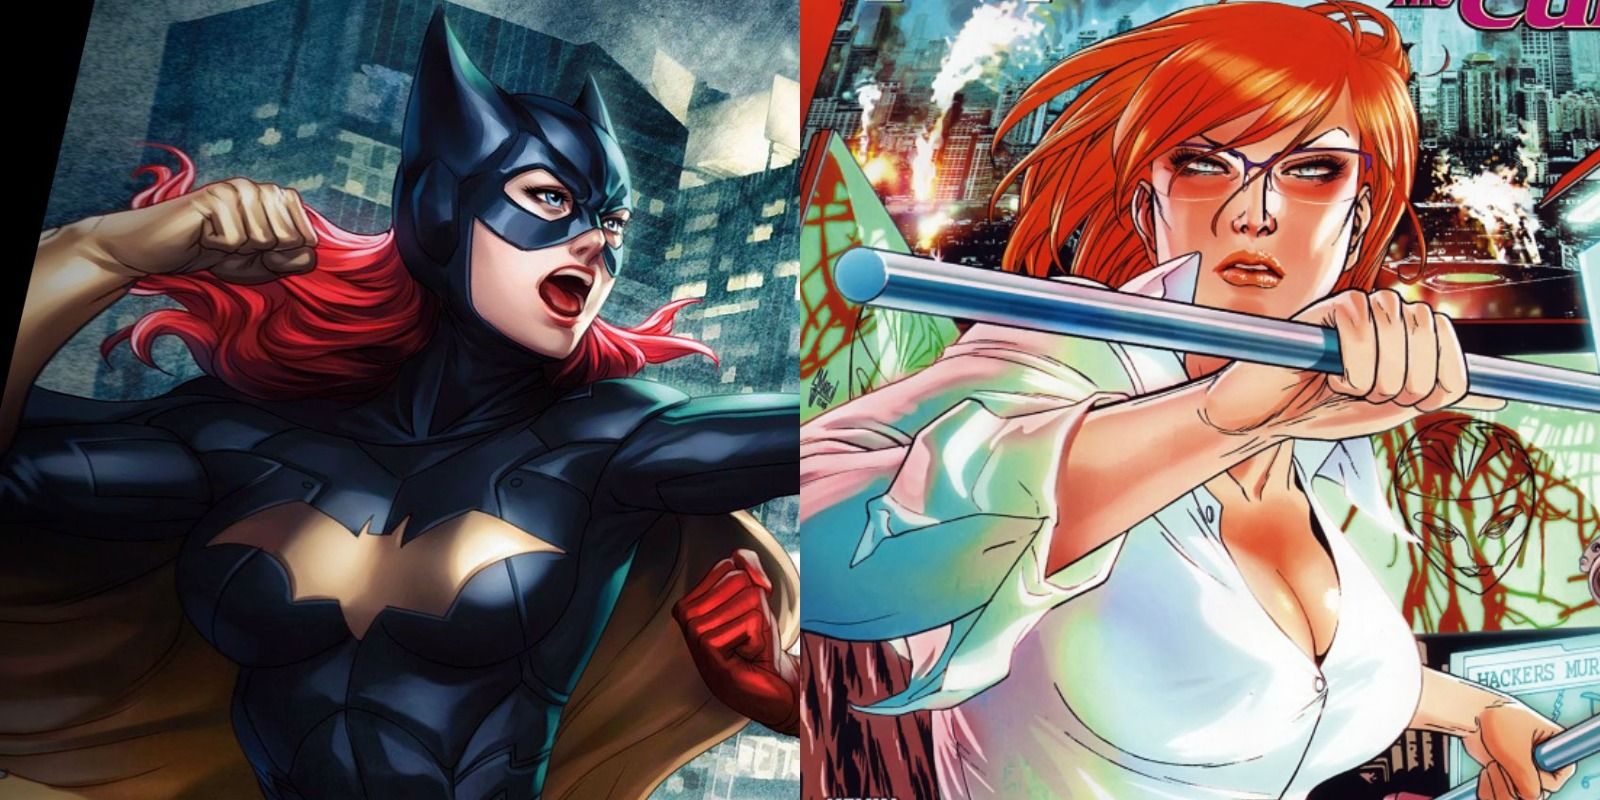 A split image of Barbara Gordon as Batgirl fighting and as Oracle holding a fighting baton.